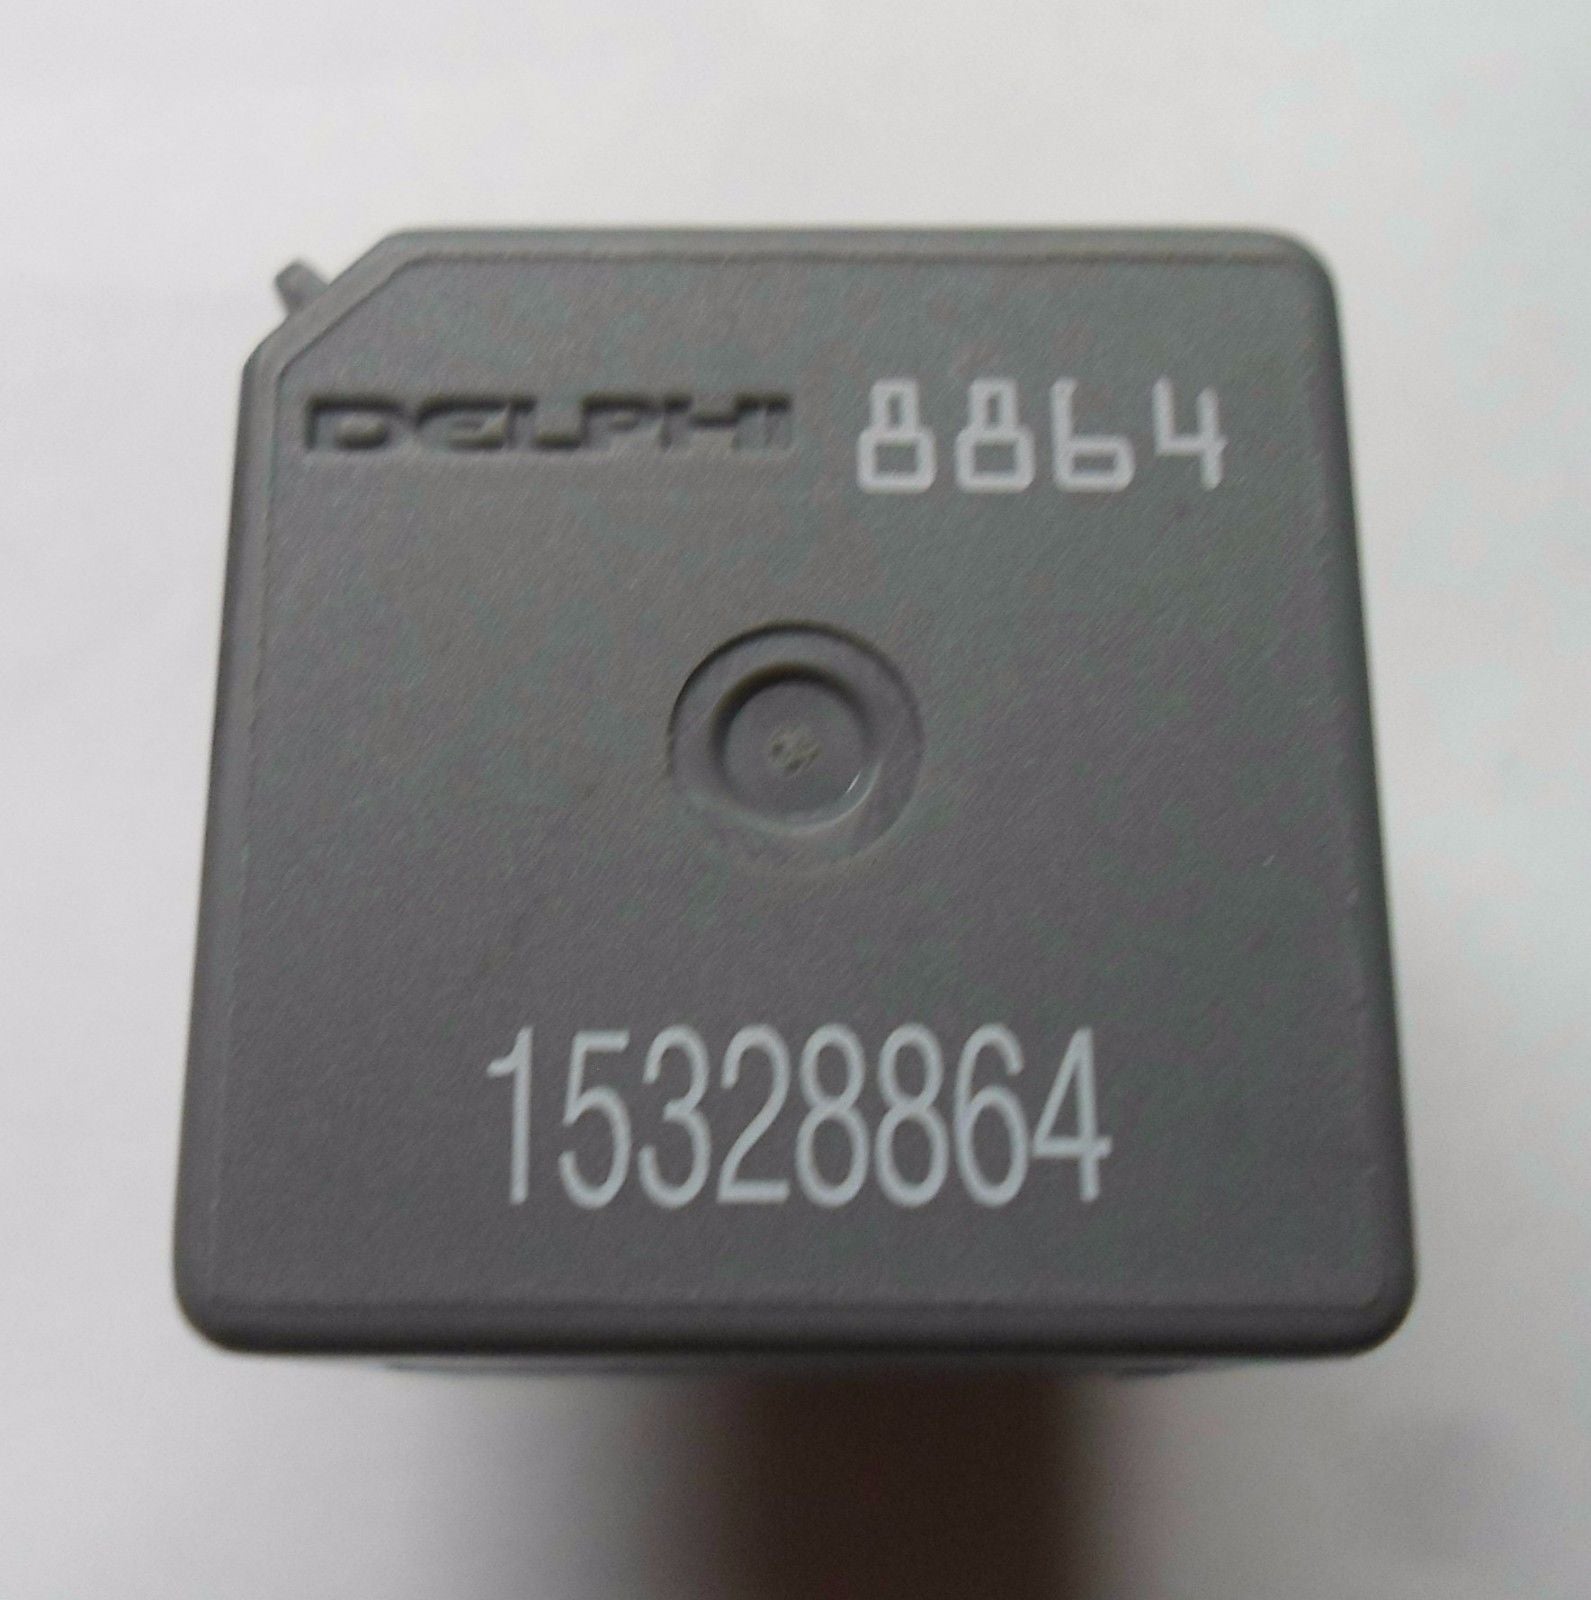 GM DELPHI  RELAY 15328864 TESTED 6 MONTH WARRANTY  FREE SHIPPING!  GM6